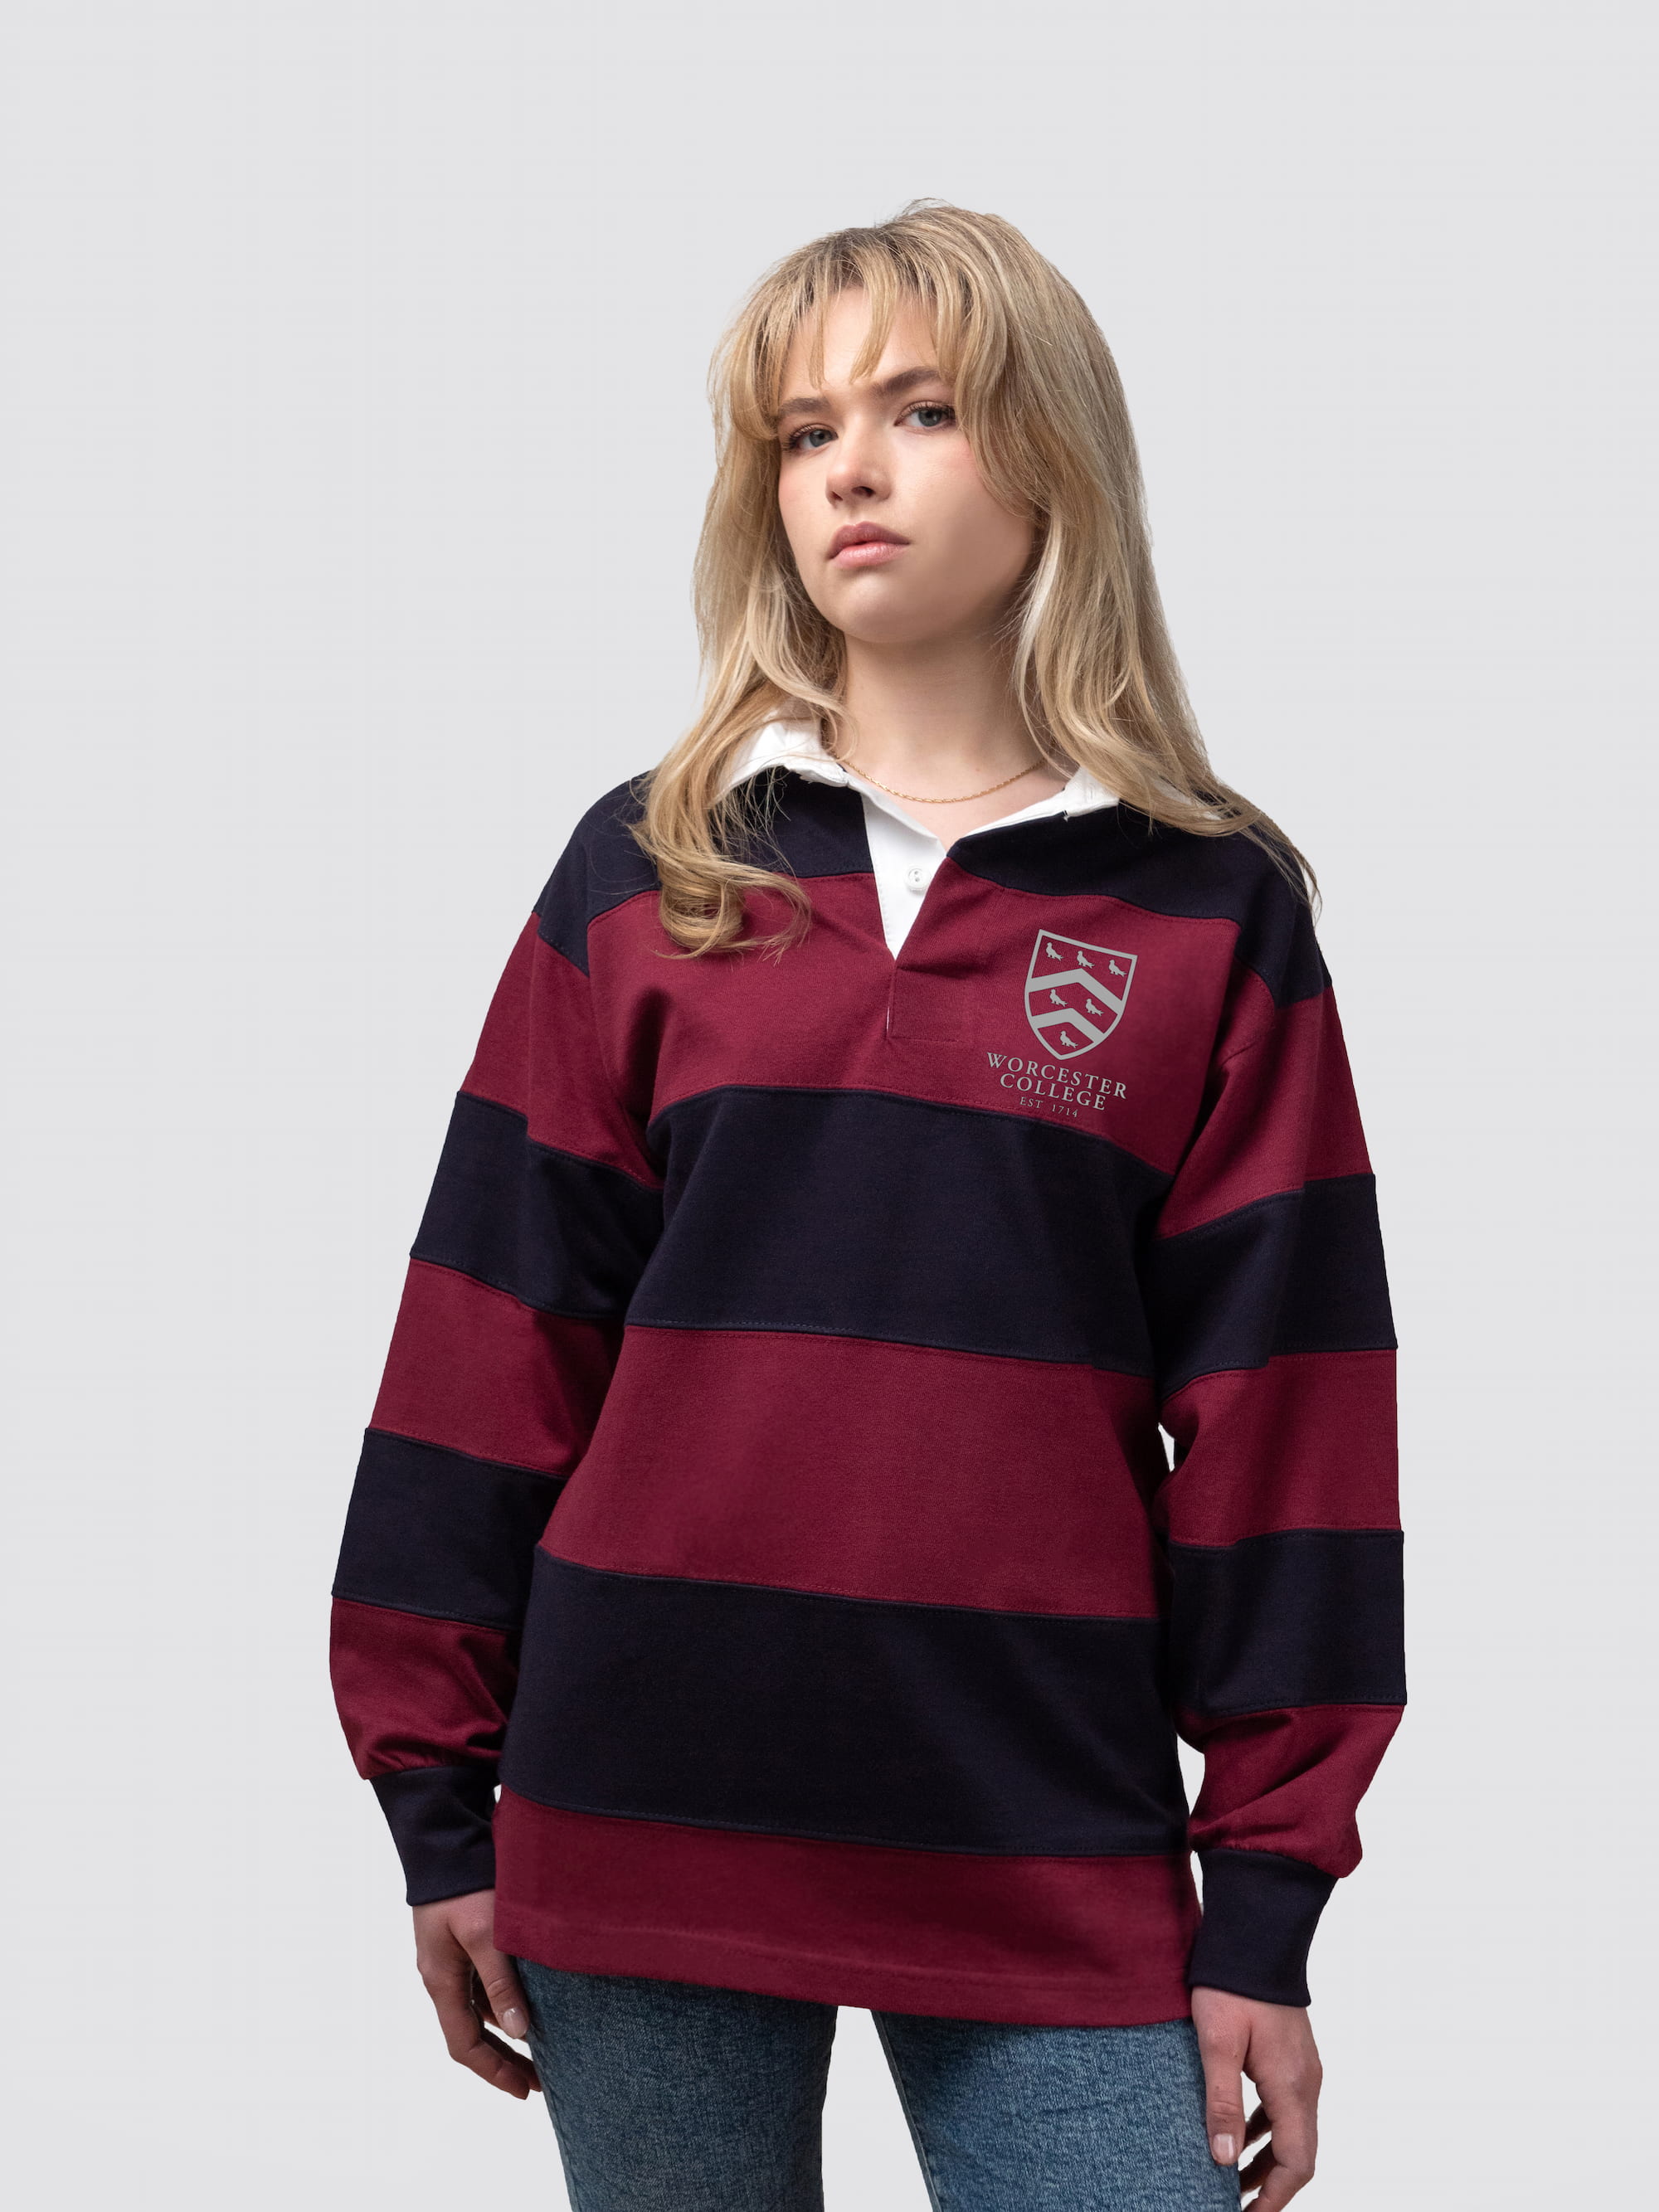 Worcester College rugby shirt, with burgundy and navy stripes